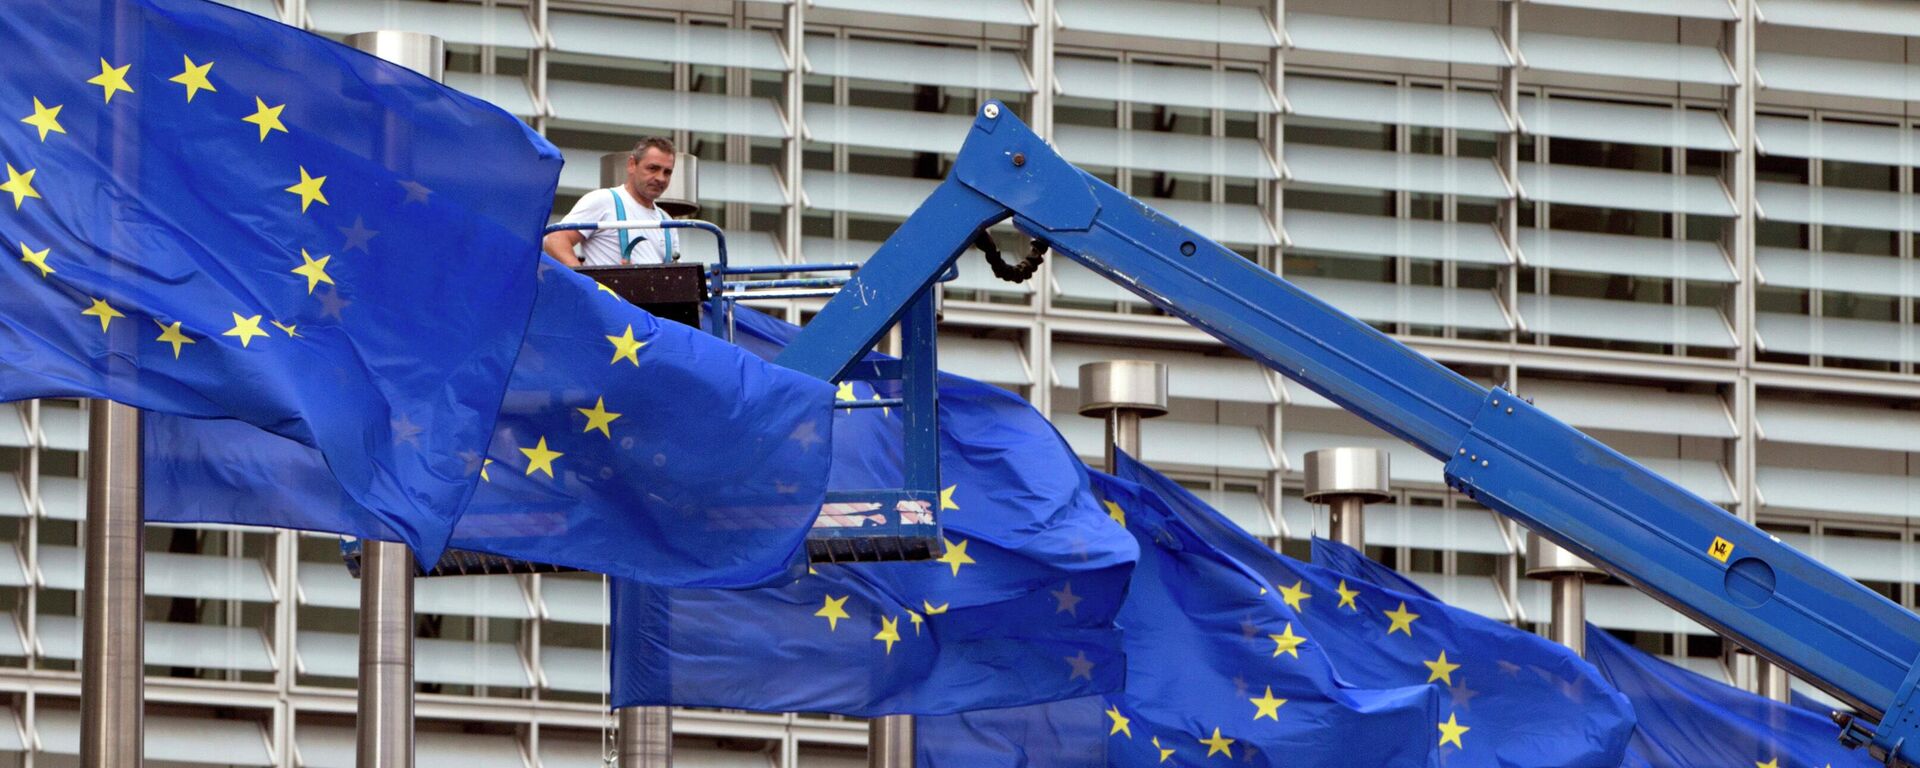 FILE- In this June 23, 2016 file photo, a worker on a lift adjusts the EU flags in front of EU headquarters in Brussels - Sputnik International, 1920, 05.06.2022